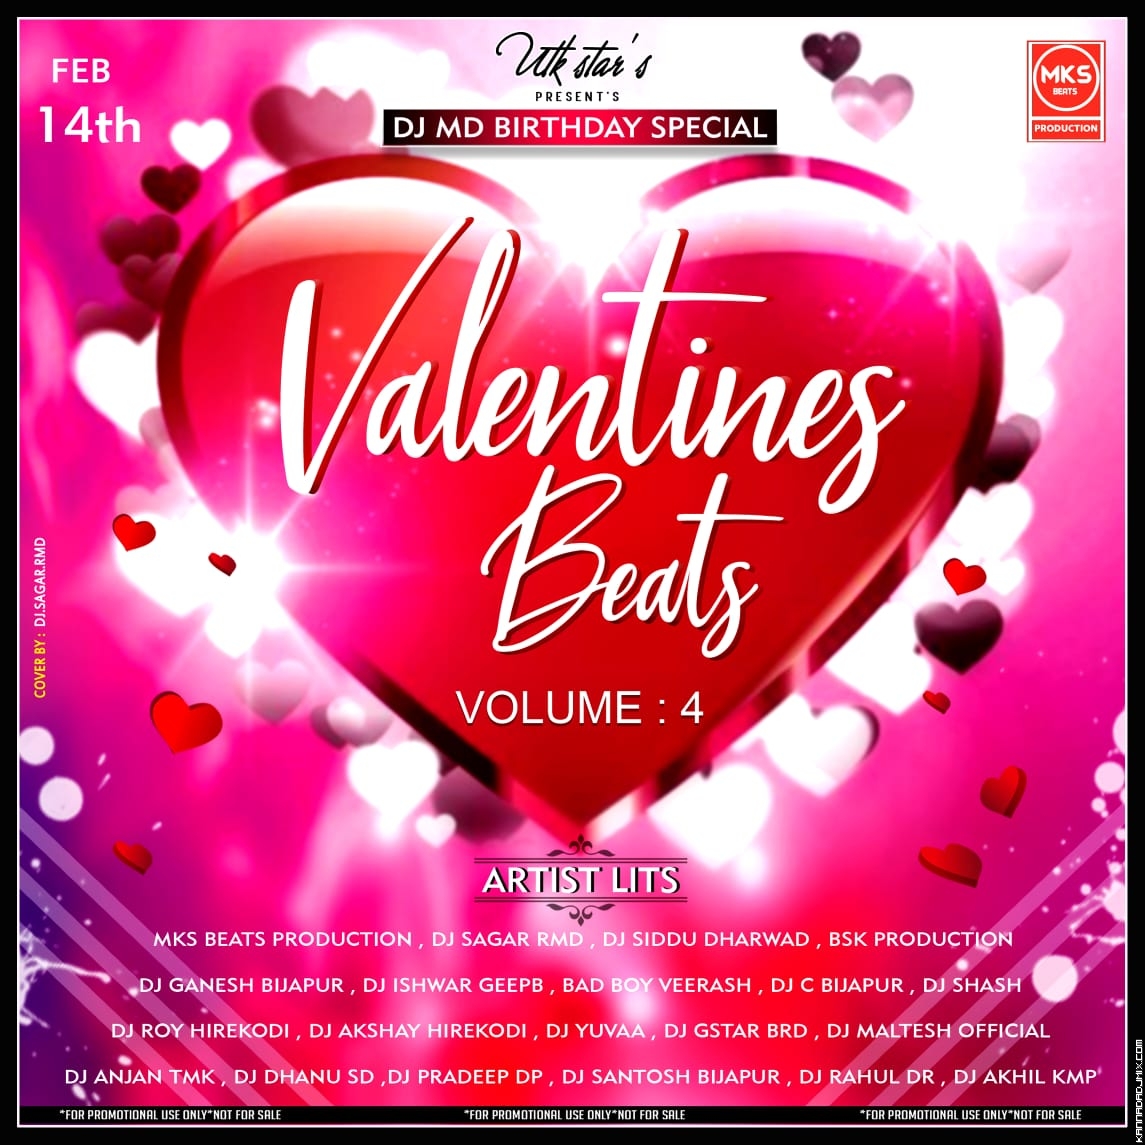 27-LOVE - BREAKUP  KANNADA SONG RE-MIX BY DJ SD.mp3